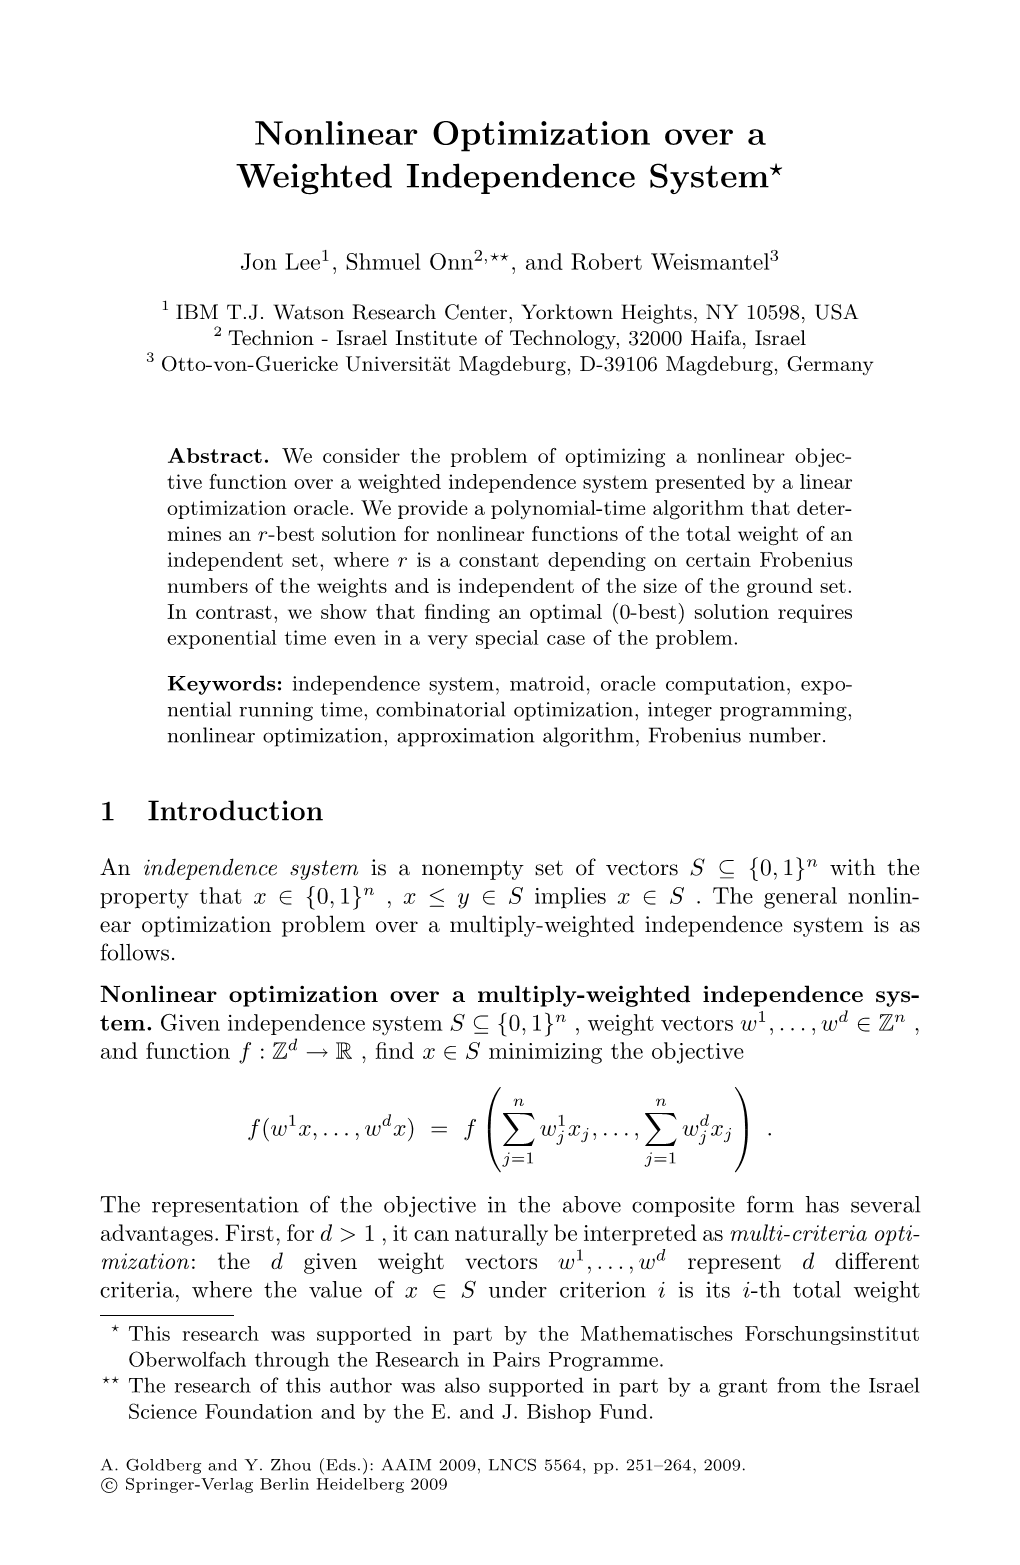 Nonlinear Optimization Over a Weighted Independence System